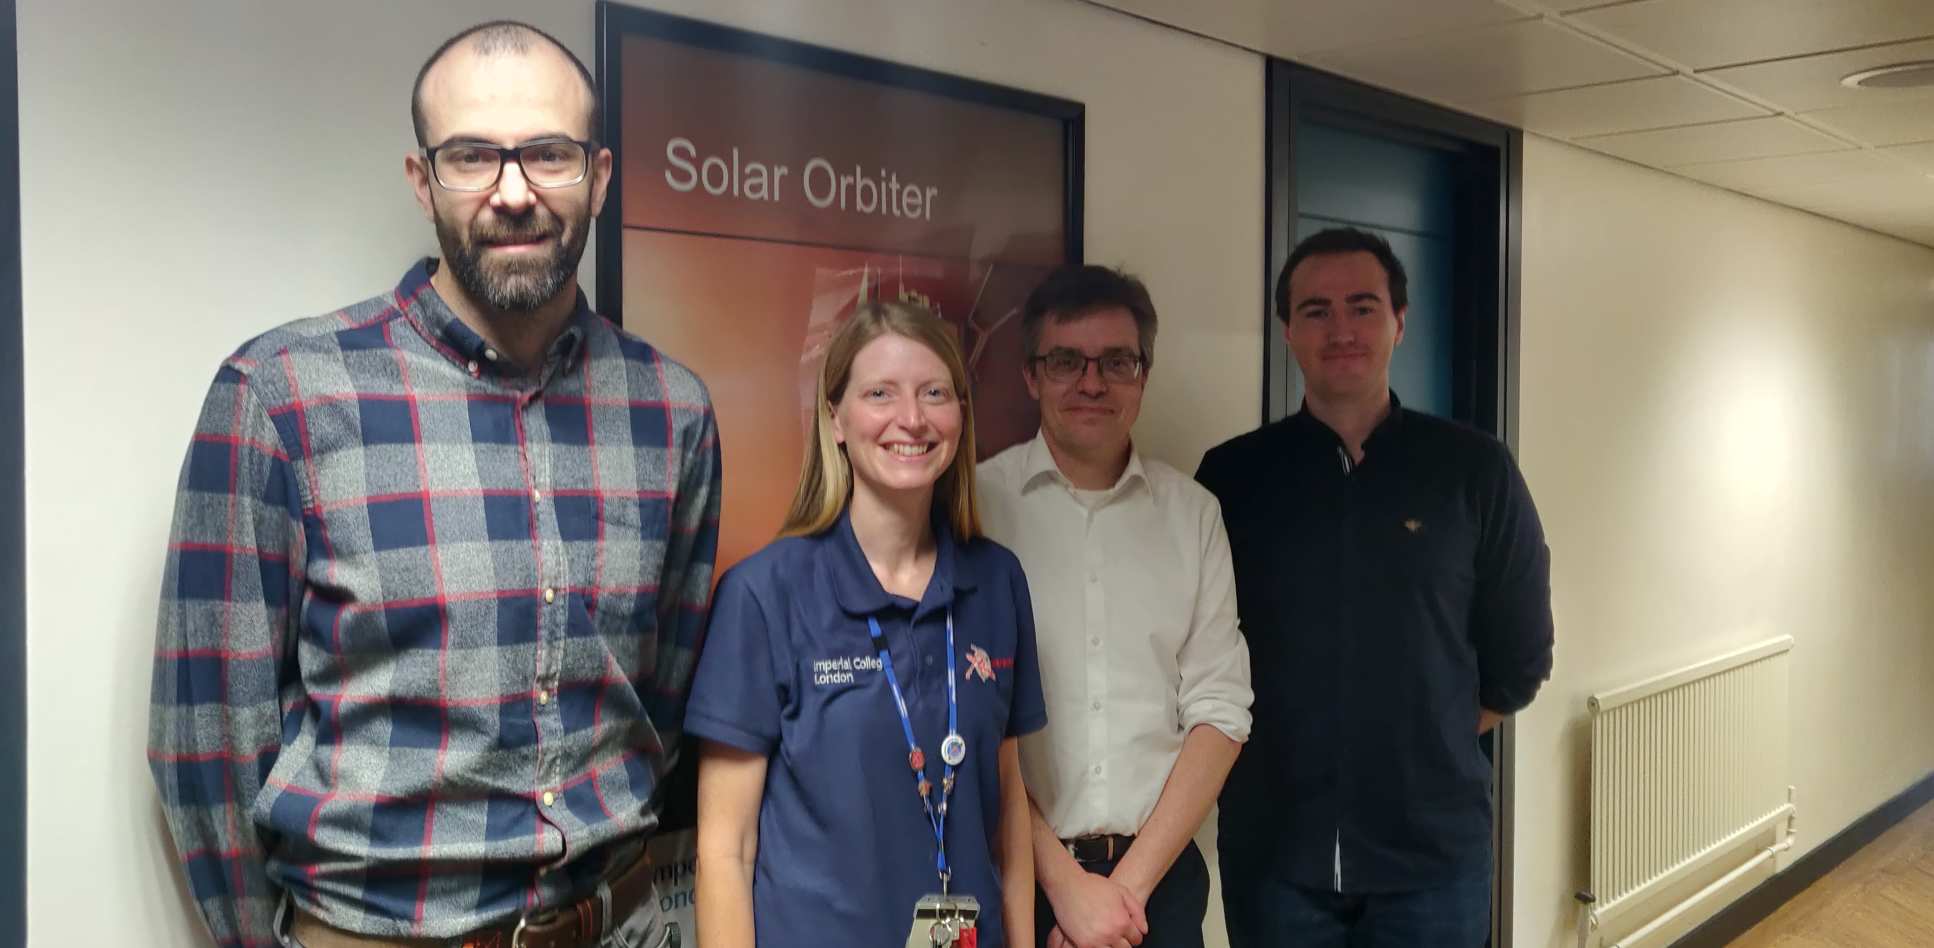 People in front of a Solar orbiter poster